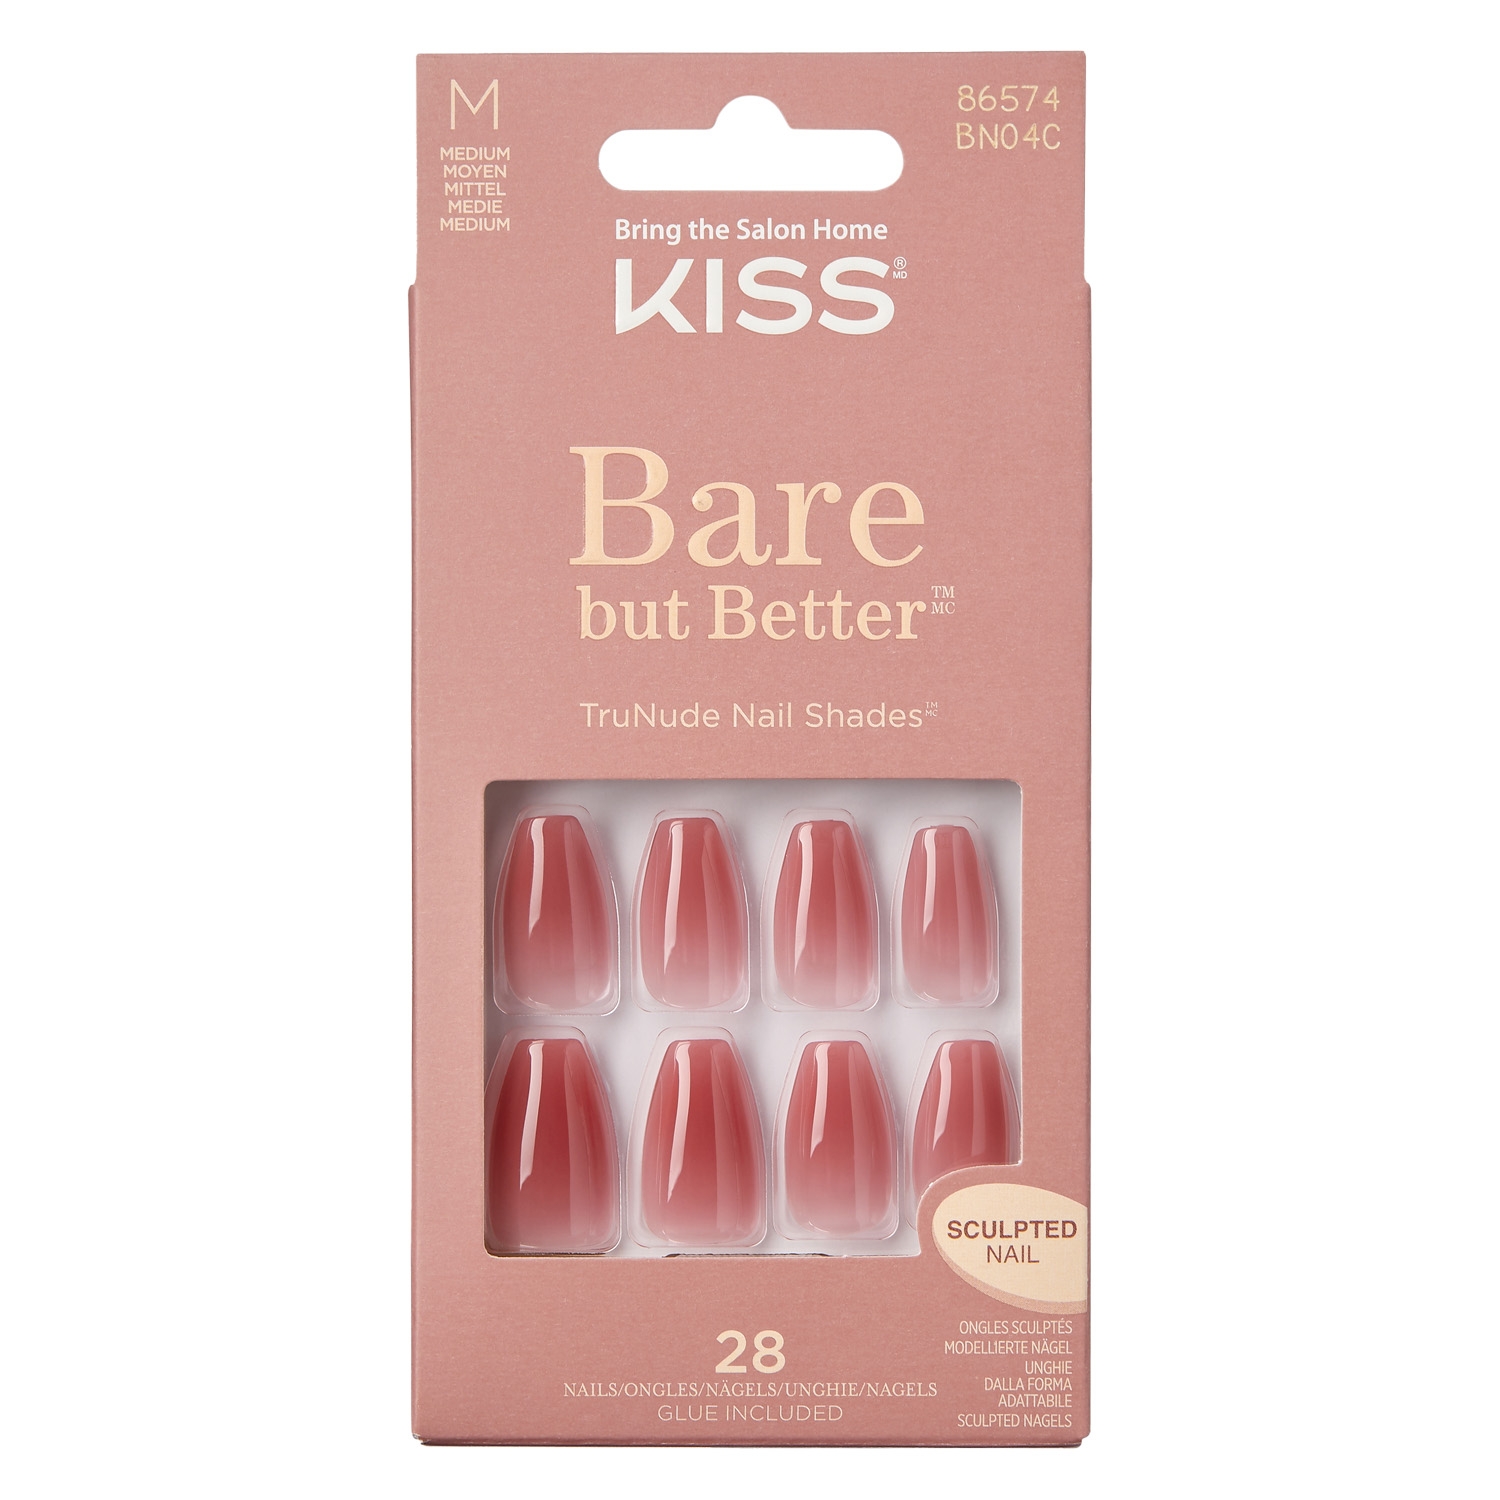 Produktbild von KISS Nails - Bare-But-Better Nails Nude Nude